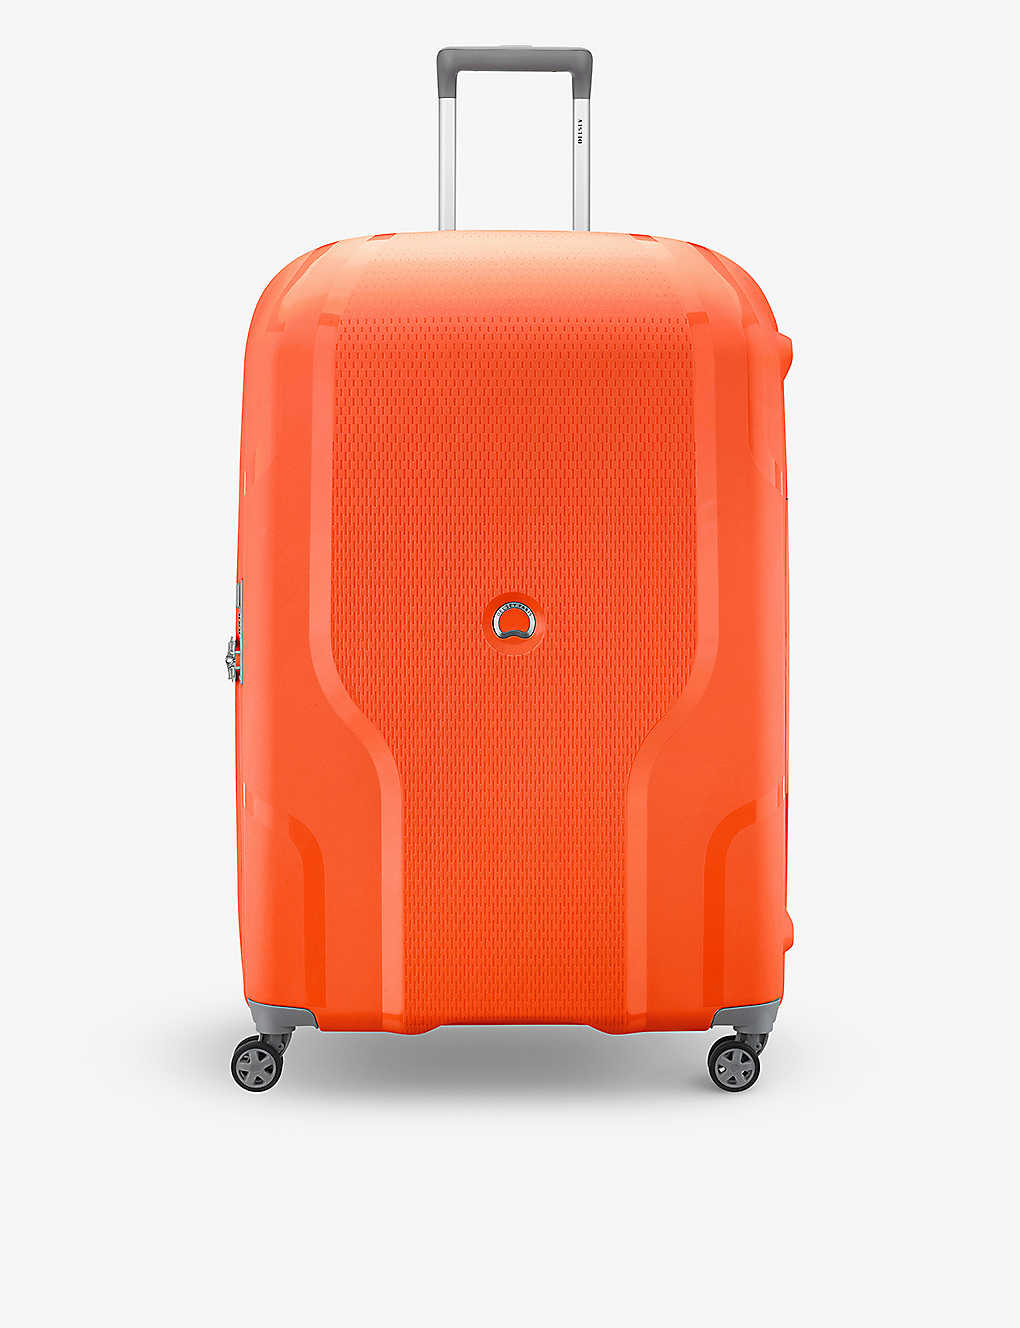 Delsey Tangerine Orange Clavel 4-wheel Xl Expandable Recycled-polypropylene Hard Check-in Suitcase 8